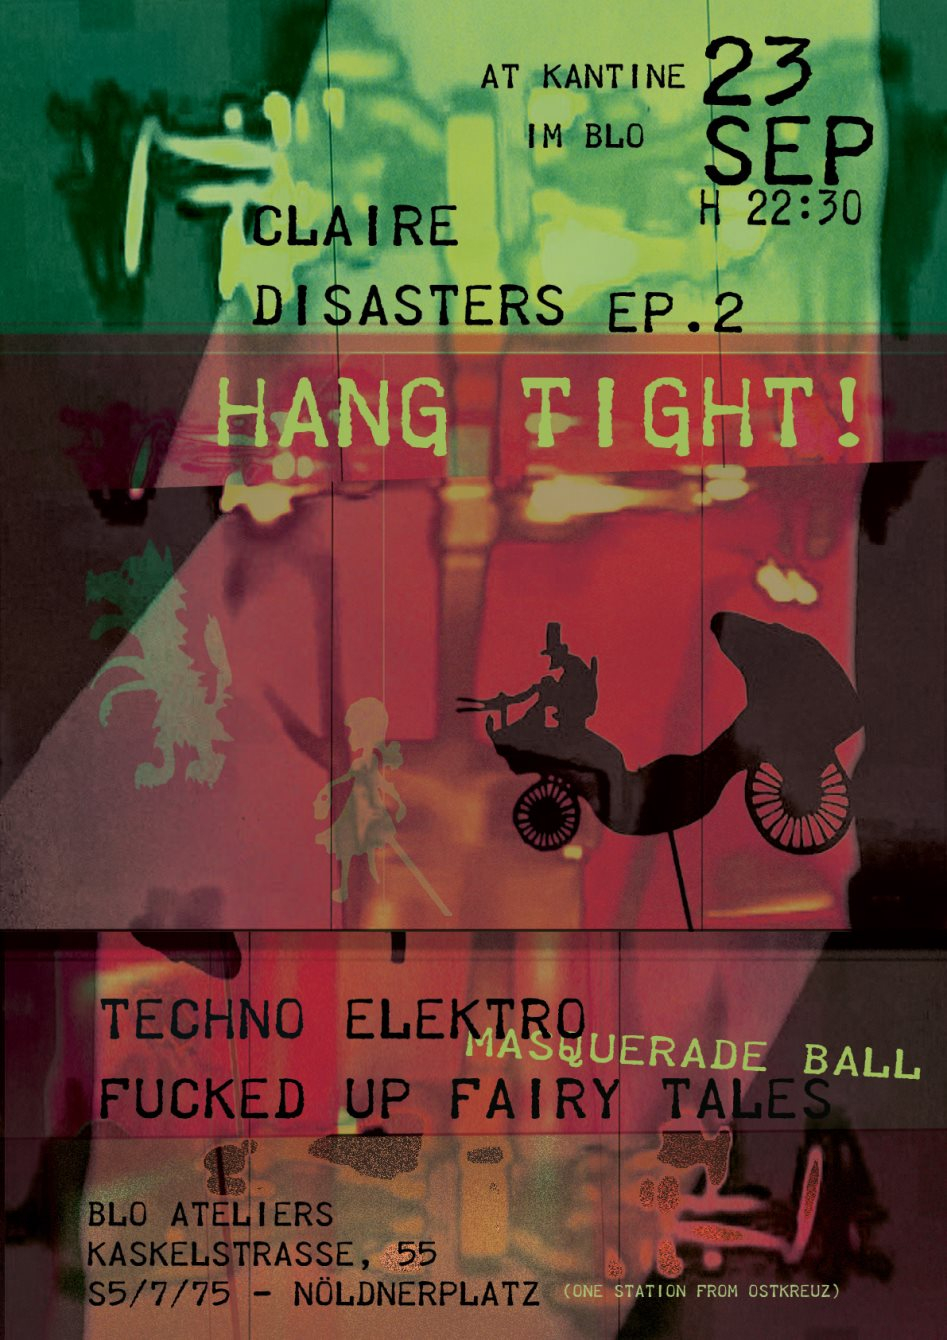 Claire Disasters Ep.2 Hang Tight! - Masquerade Ball - Flyer front